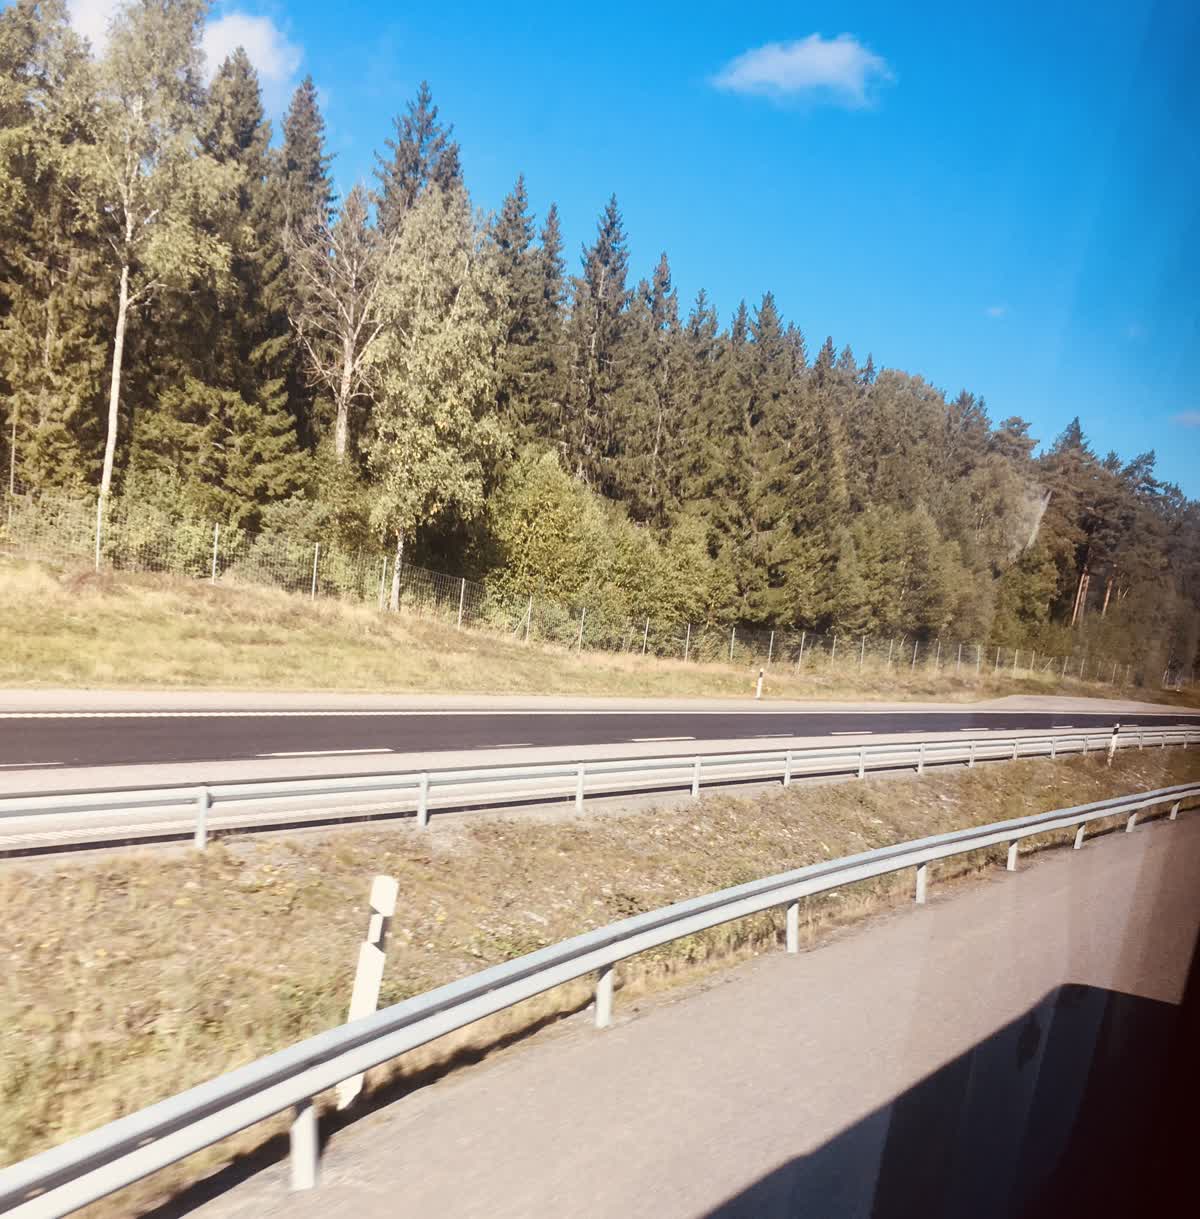 A forest from the view of a bus